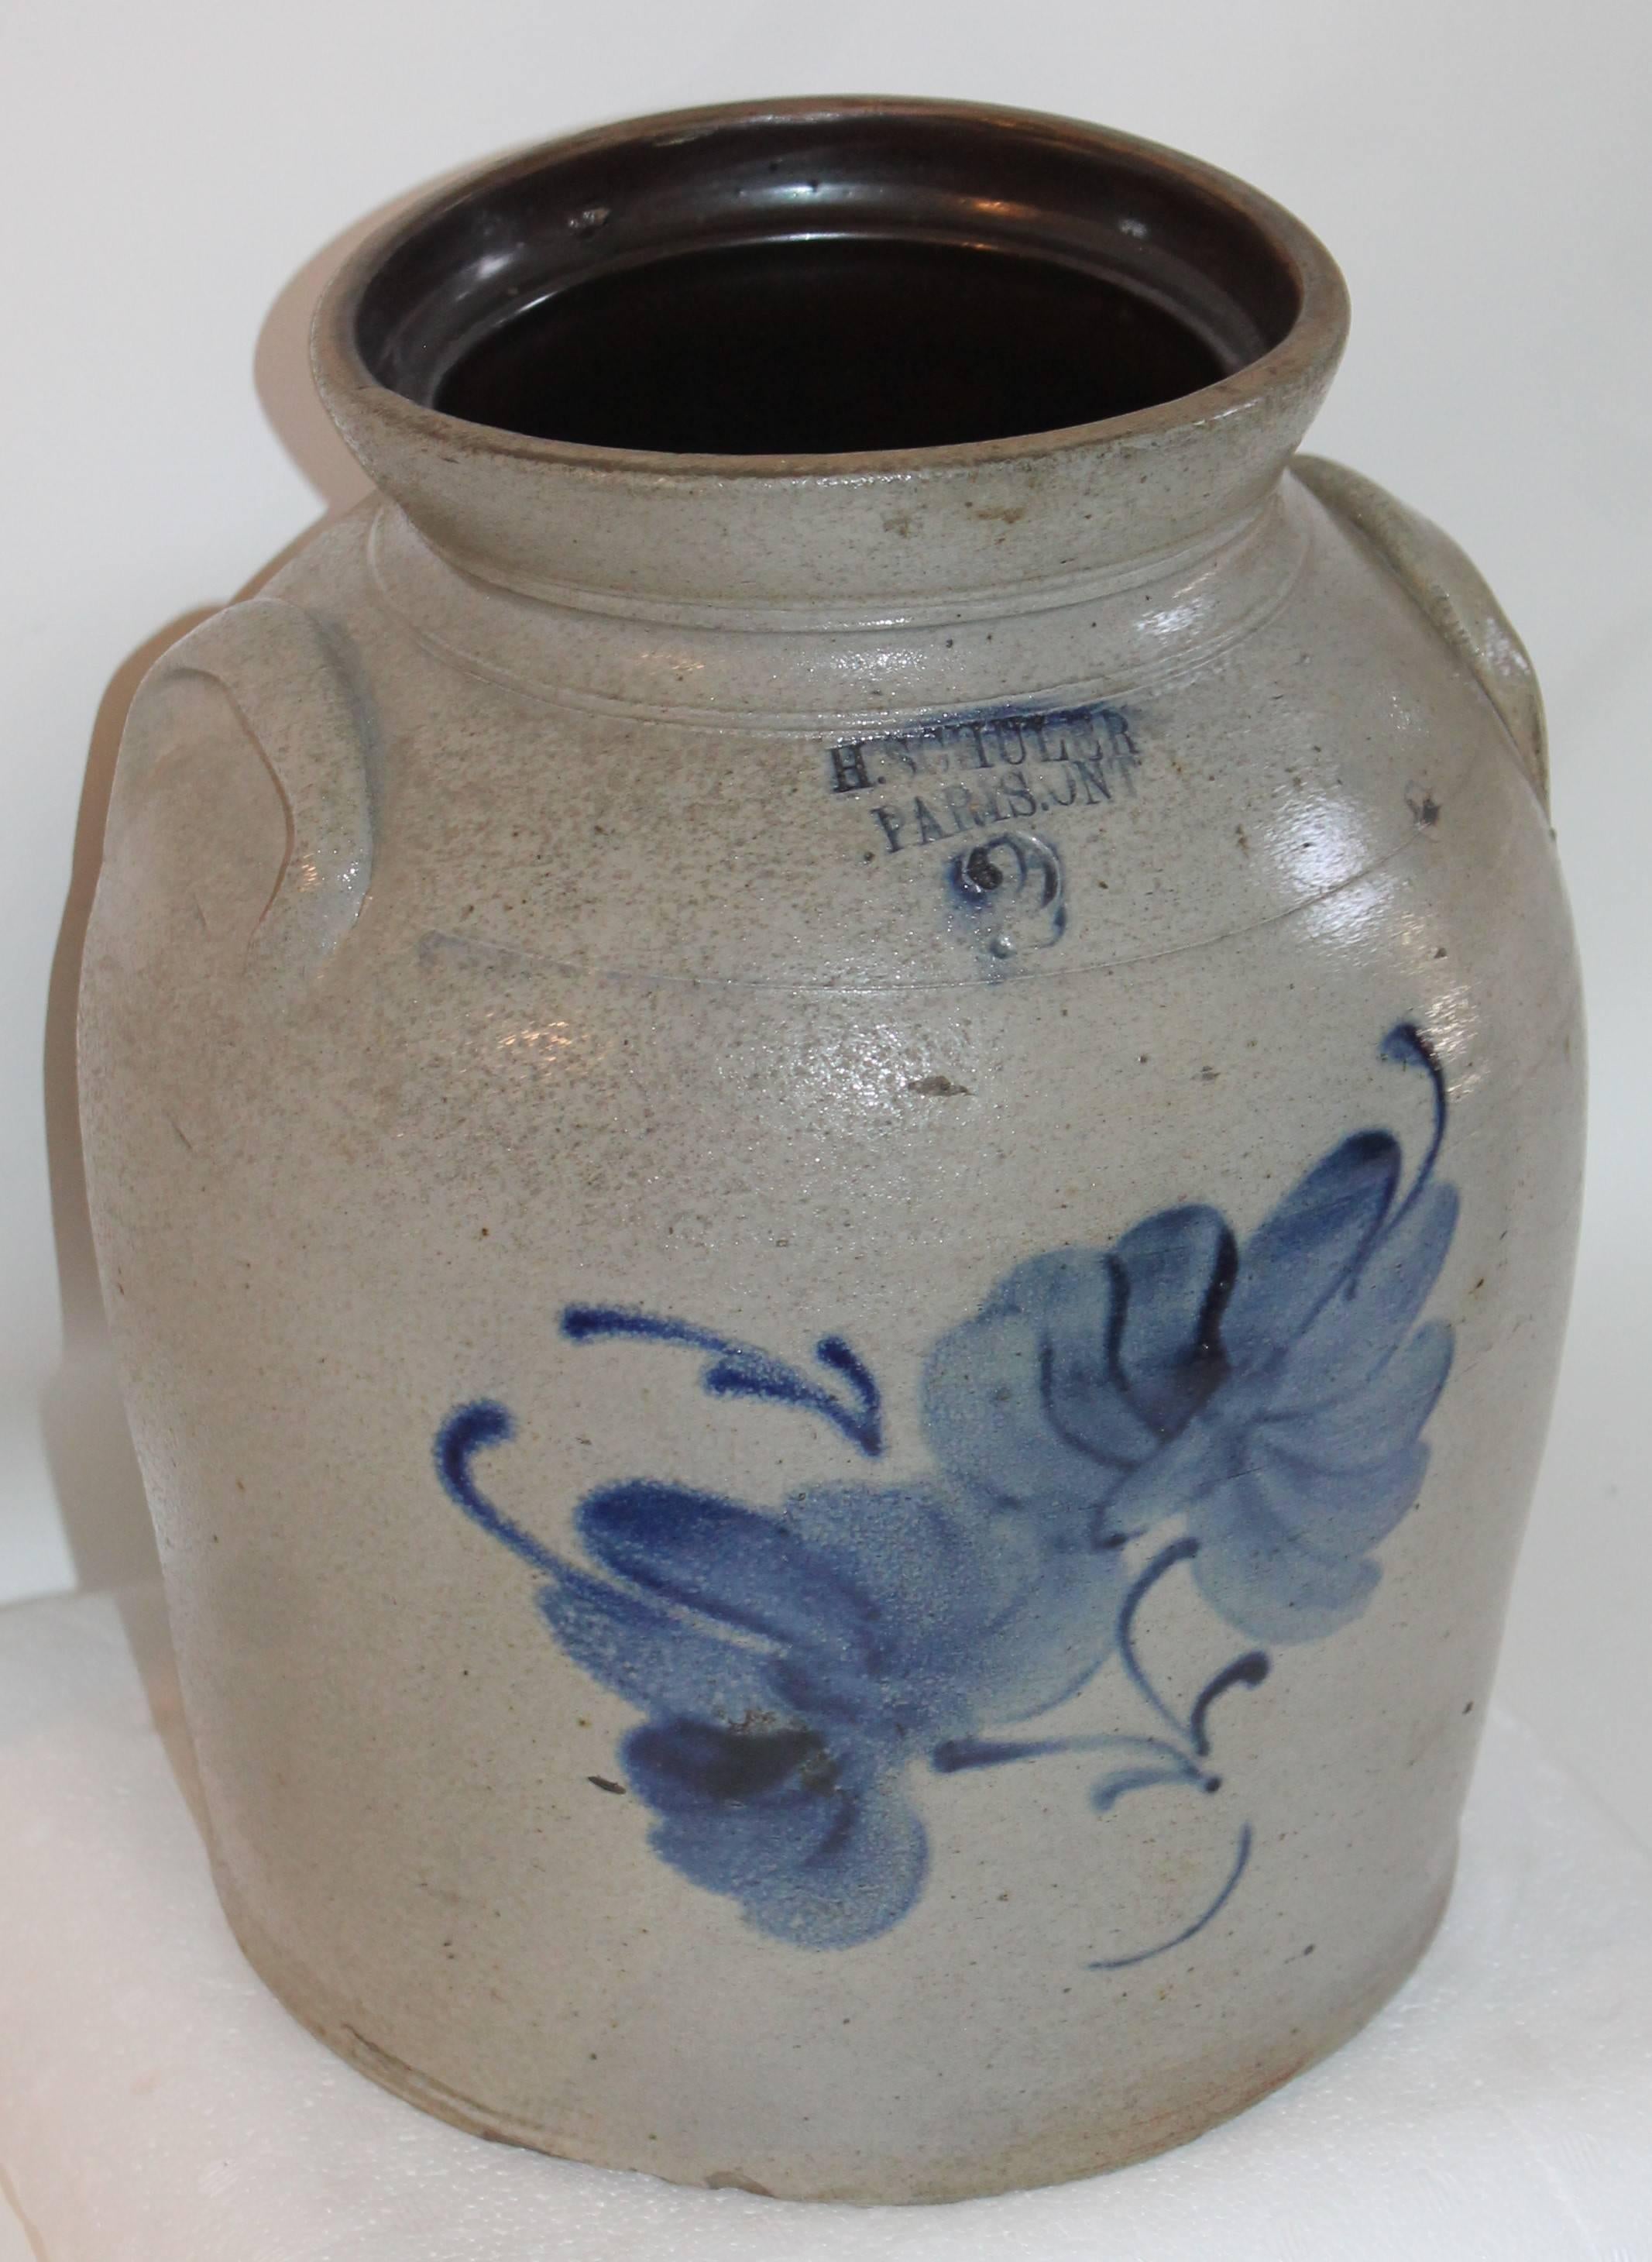 This fine Folk Art pottery crock has heavy blue decorated salt glaze. The condition is very good. It is signed H.SCHULER PARIS,ONT .... CANADA with a blue two and large floral decoration. It is double handled as well. The is a minor glaze chip on